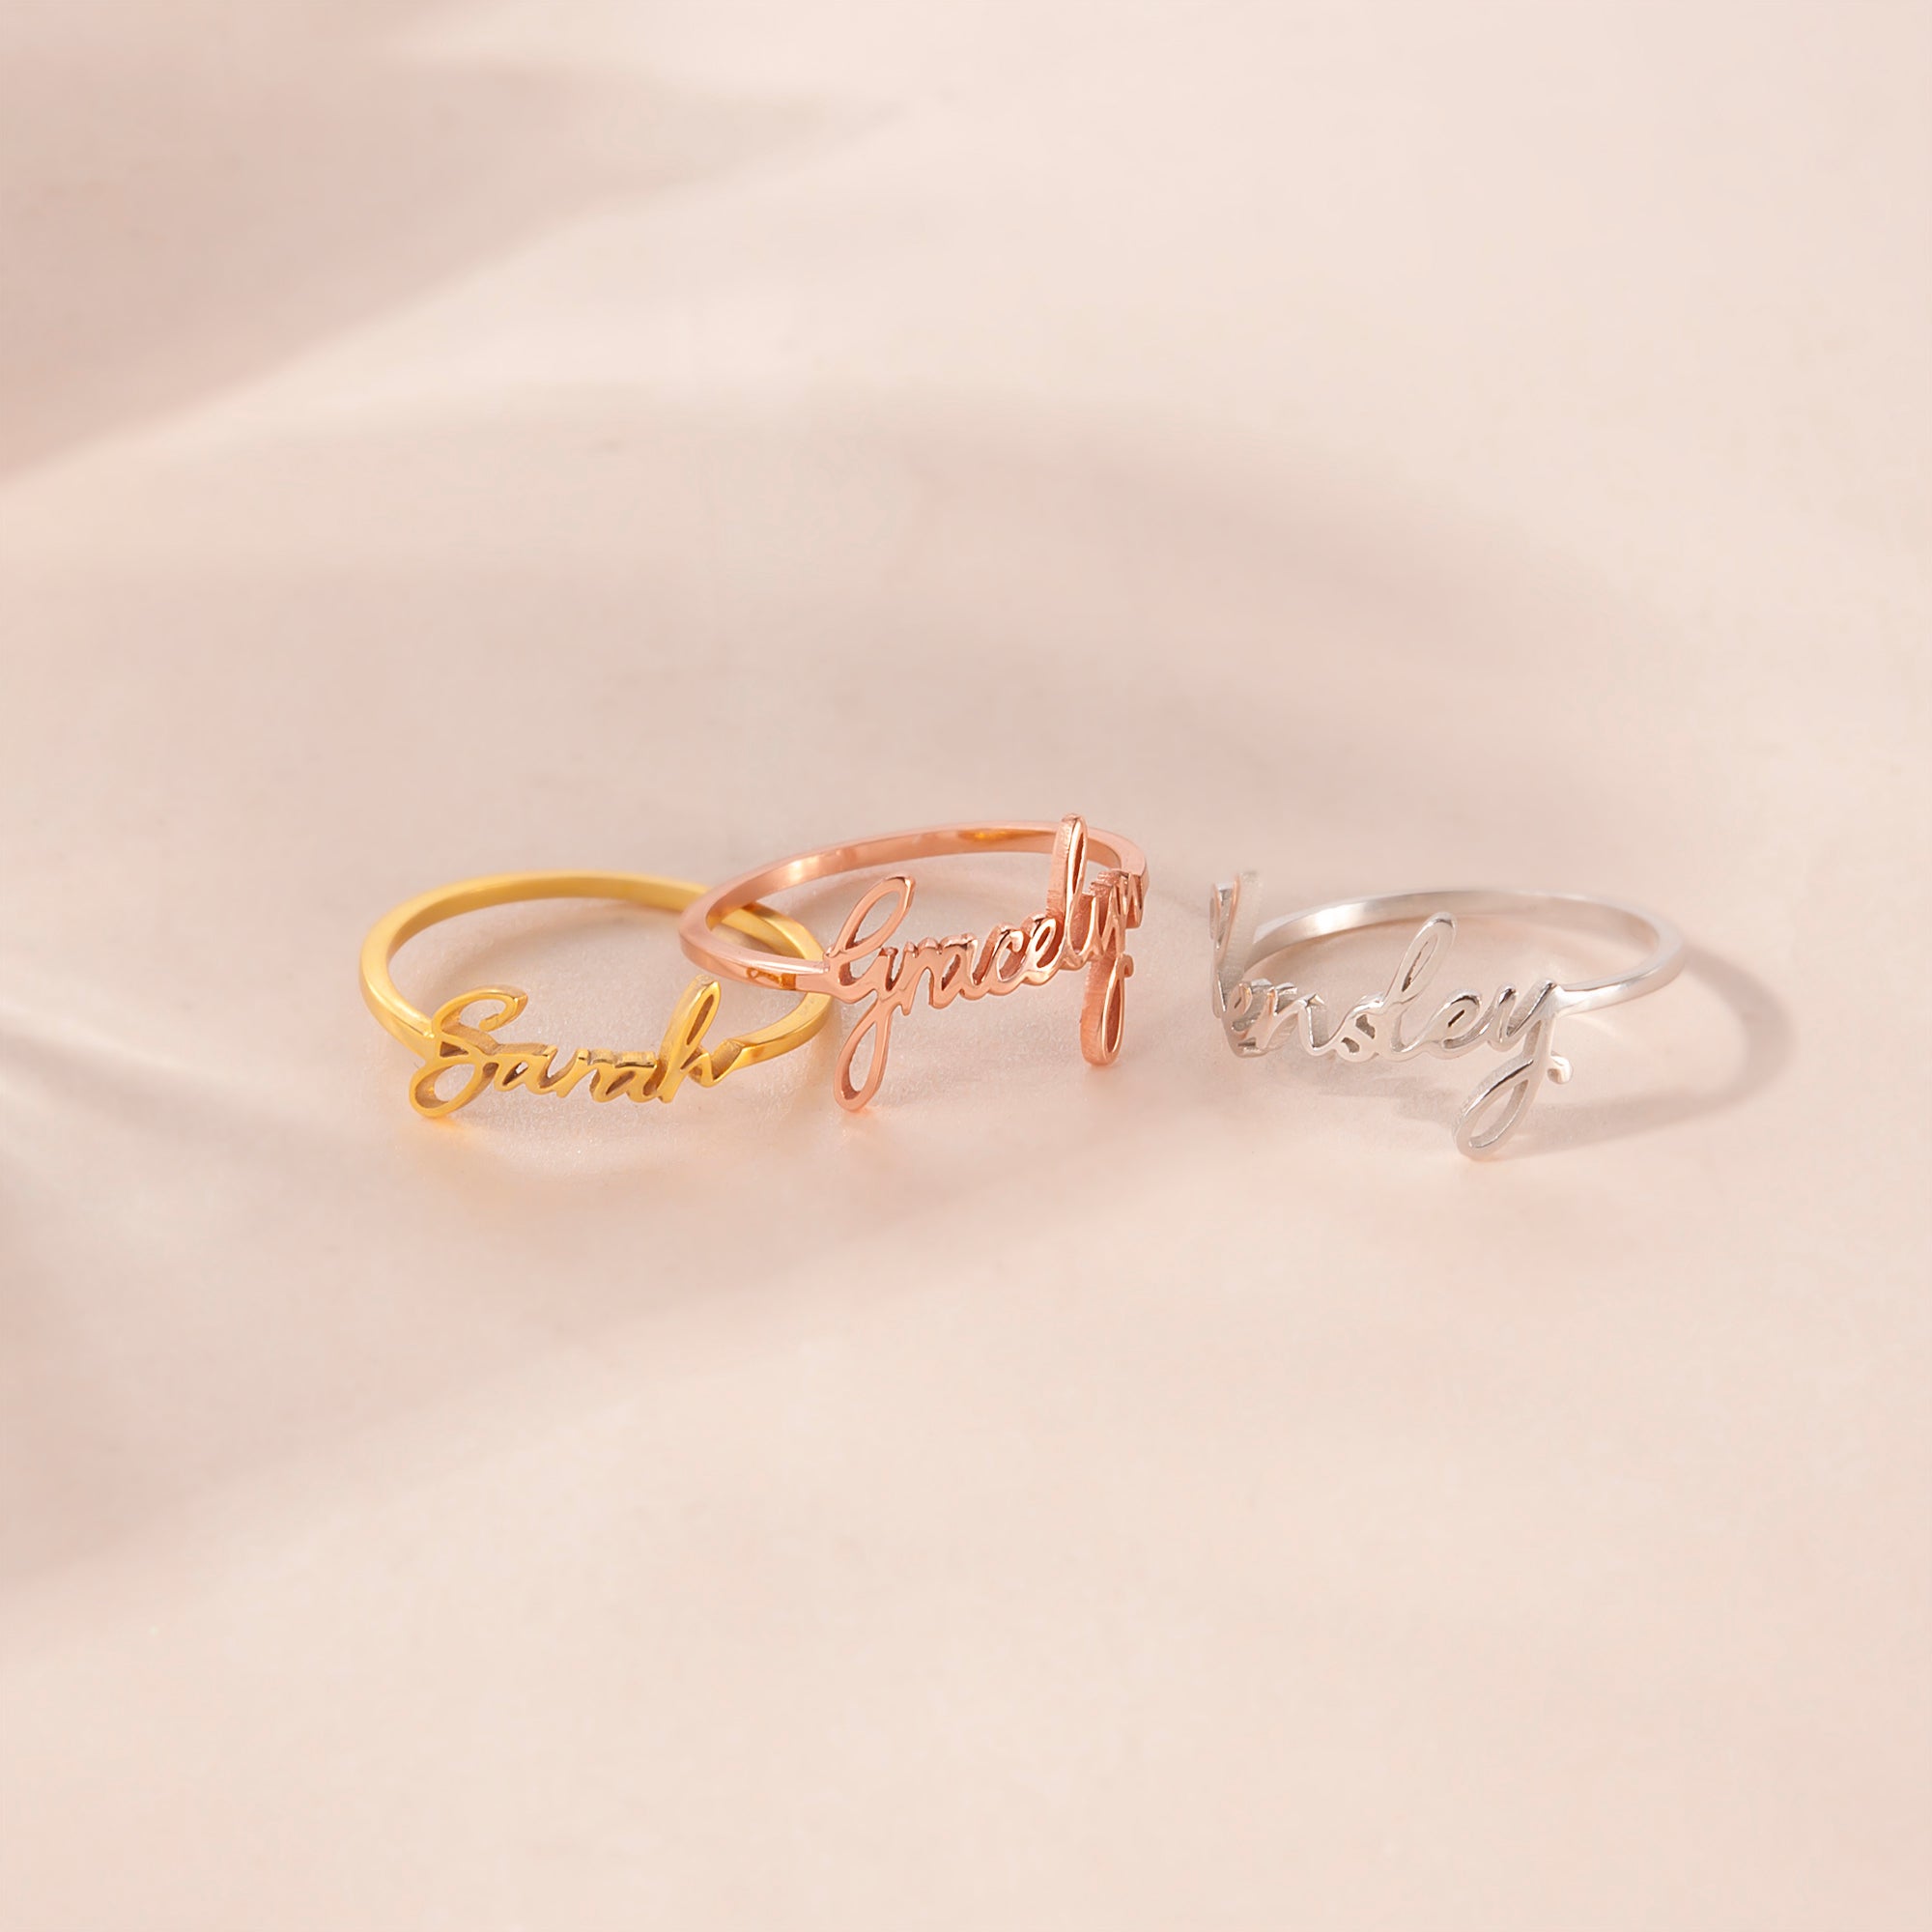 Heart Ring - The Best Gift for Self and For a Loved One